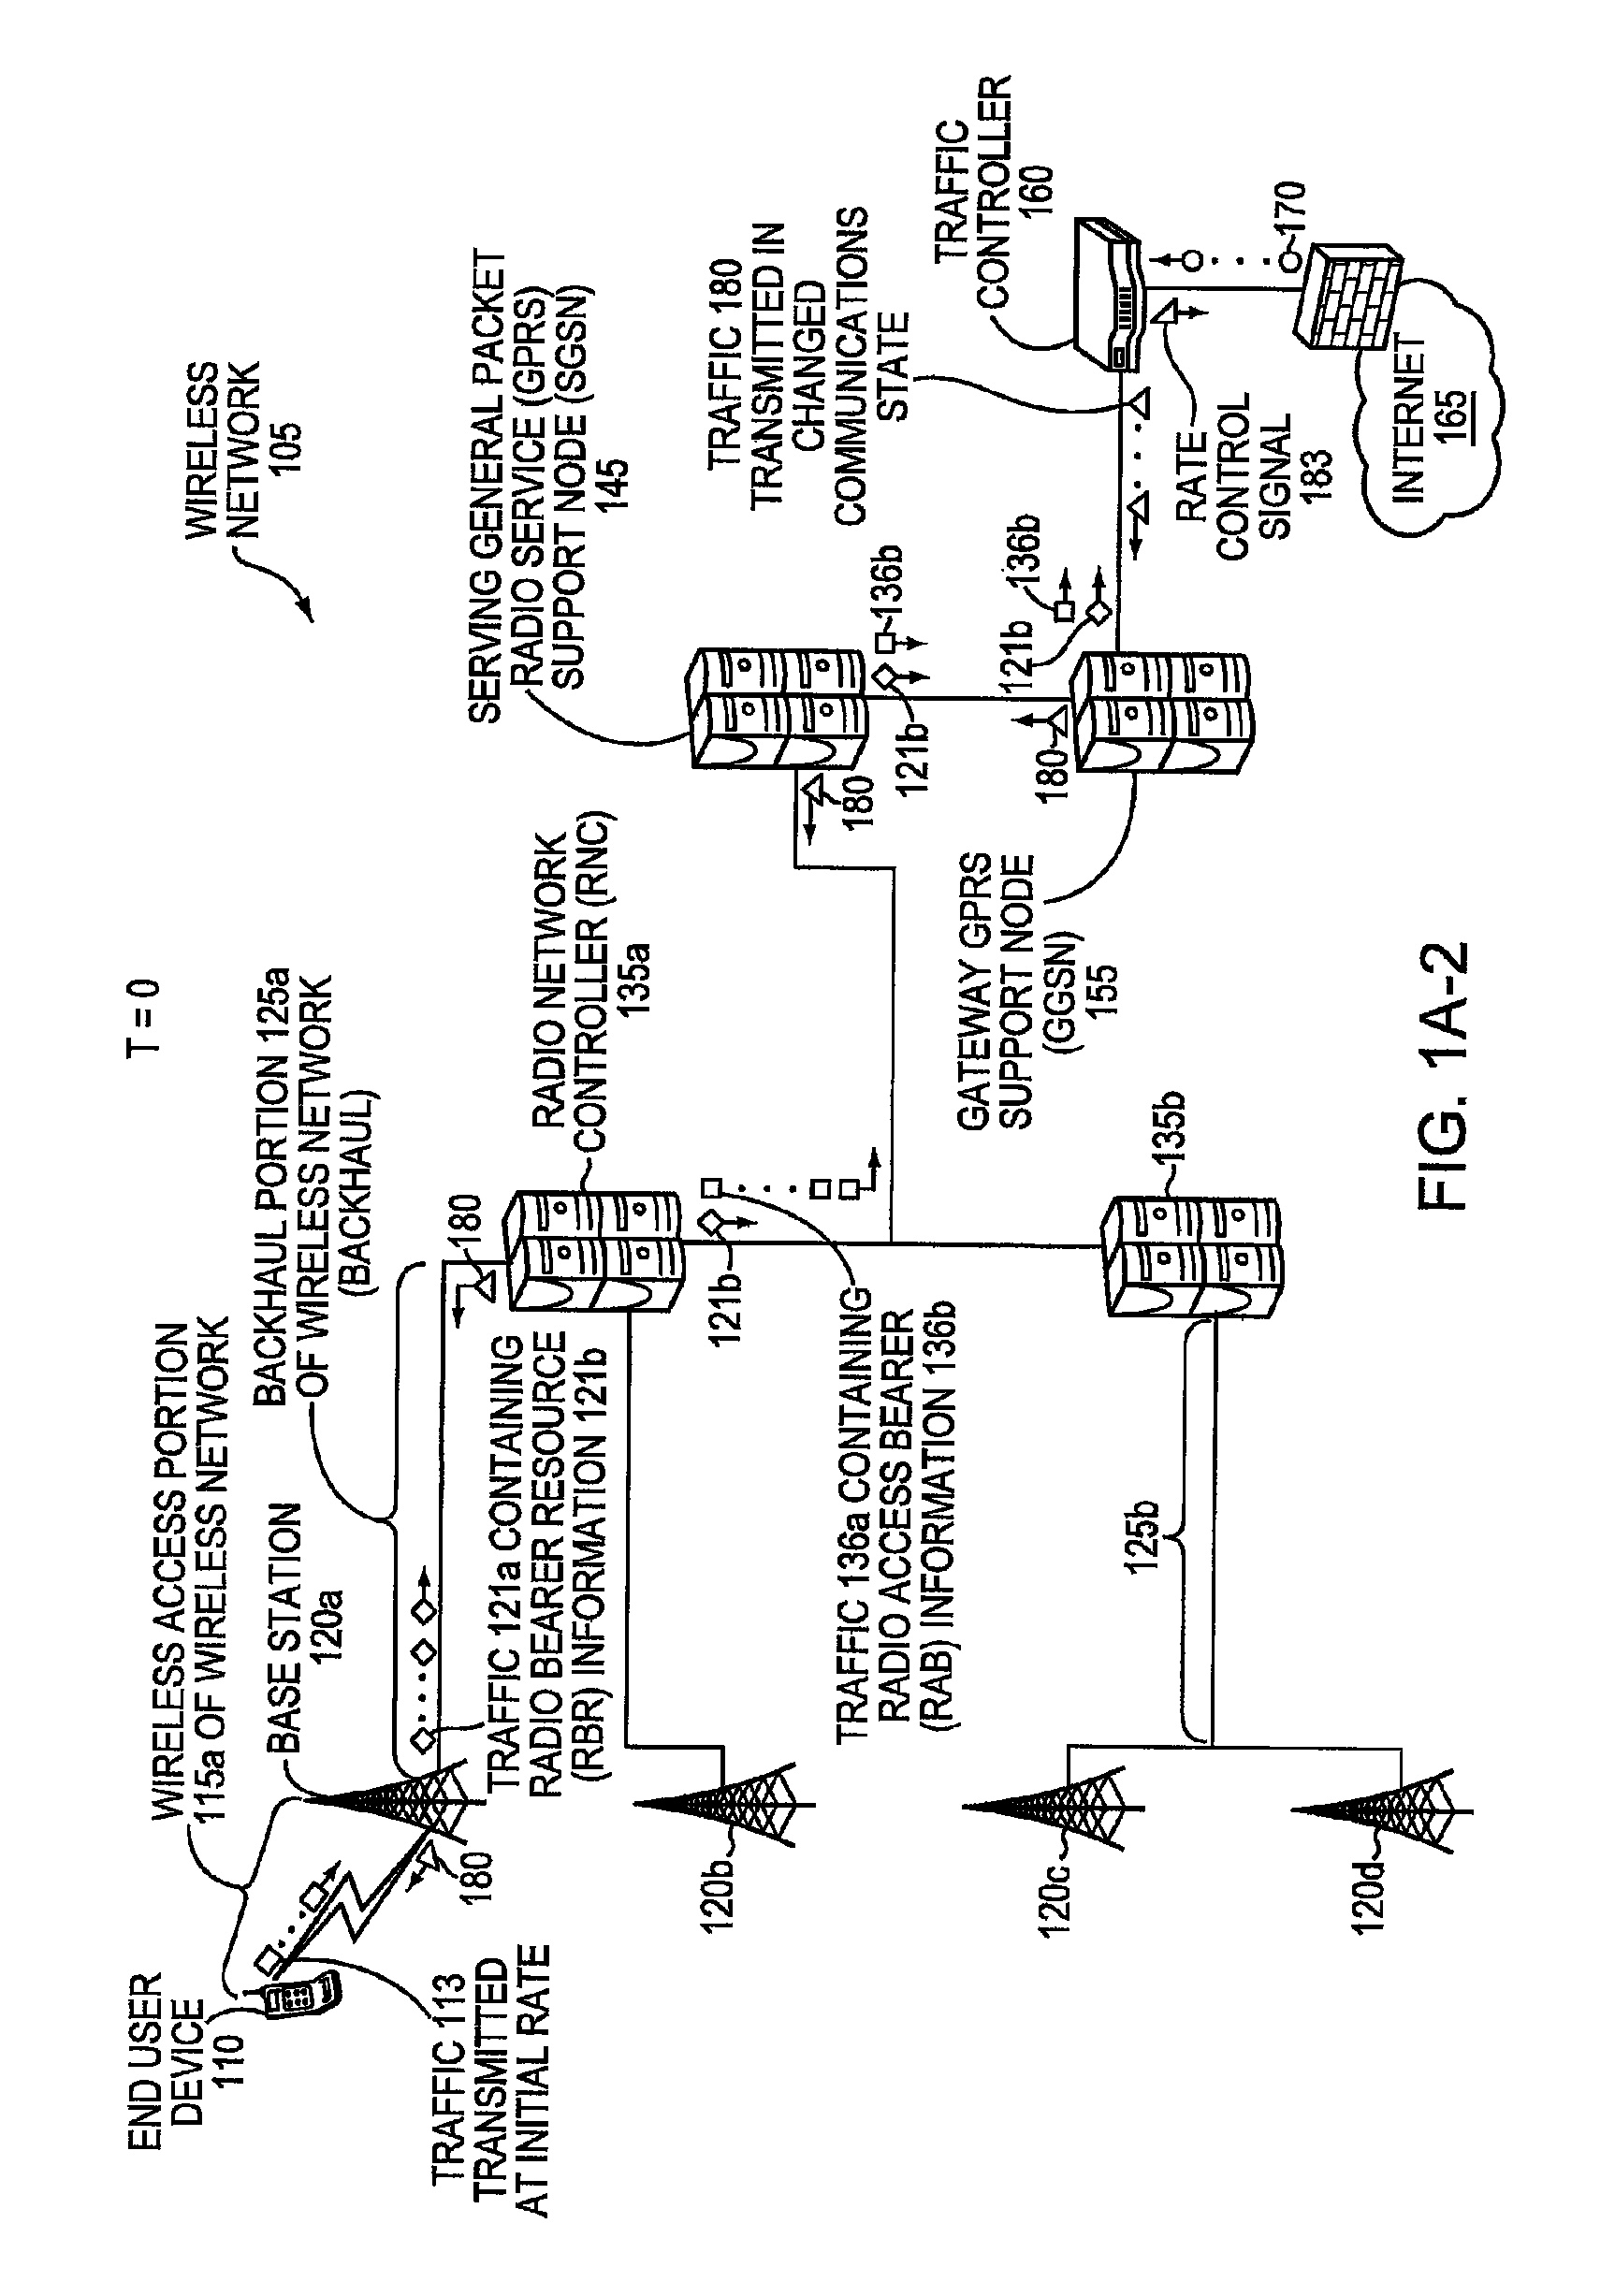 Method and apparatus for traffic management in a wireless network